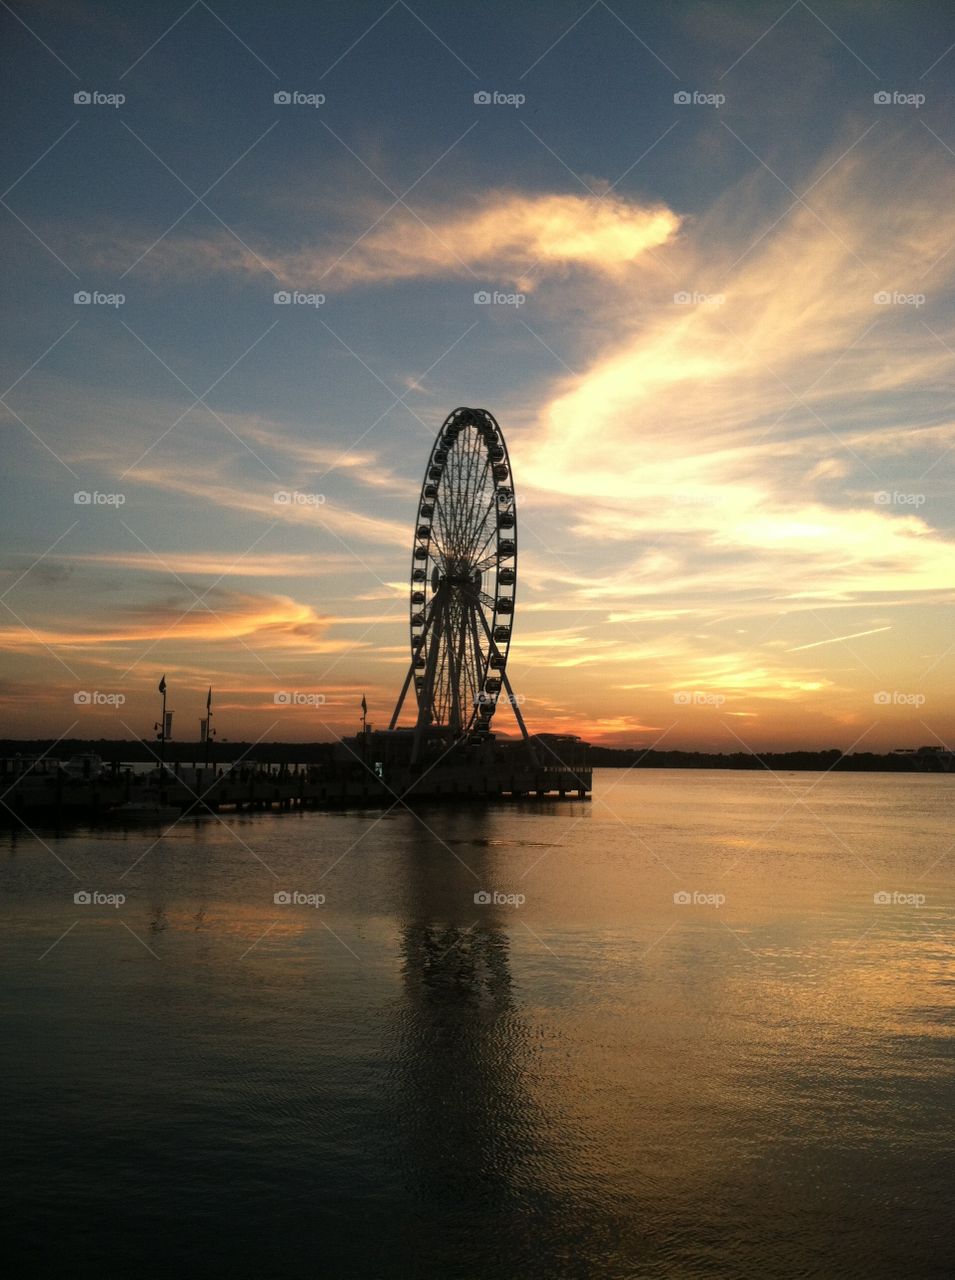 Evening glow at the National Harbor